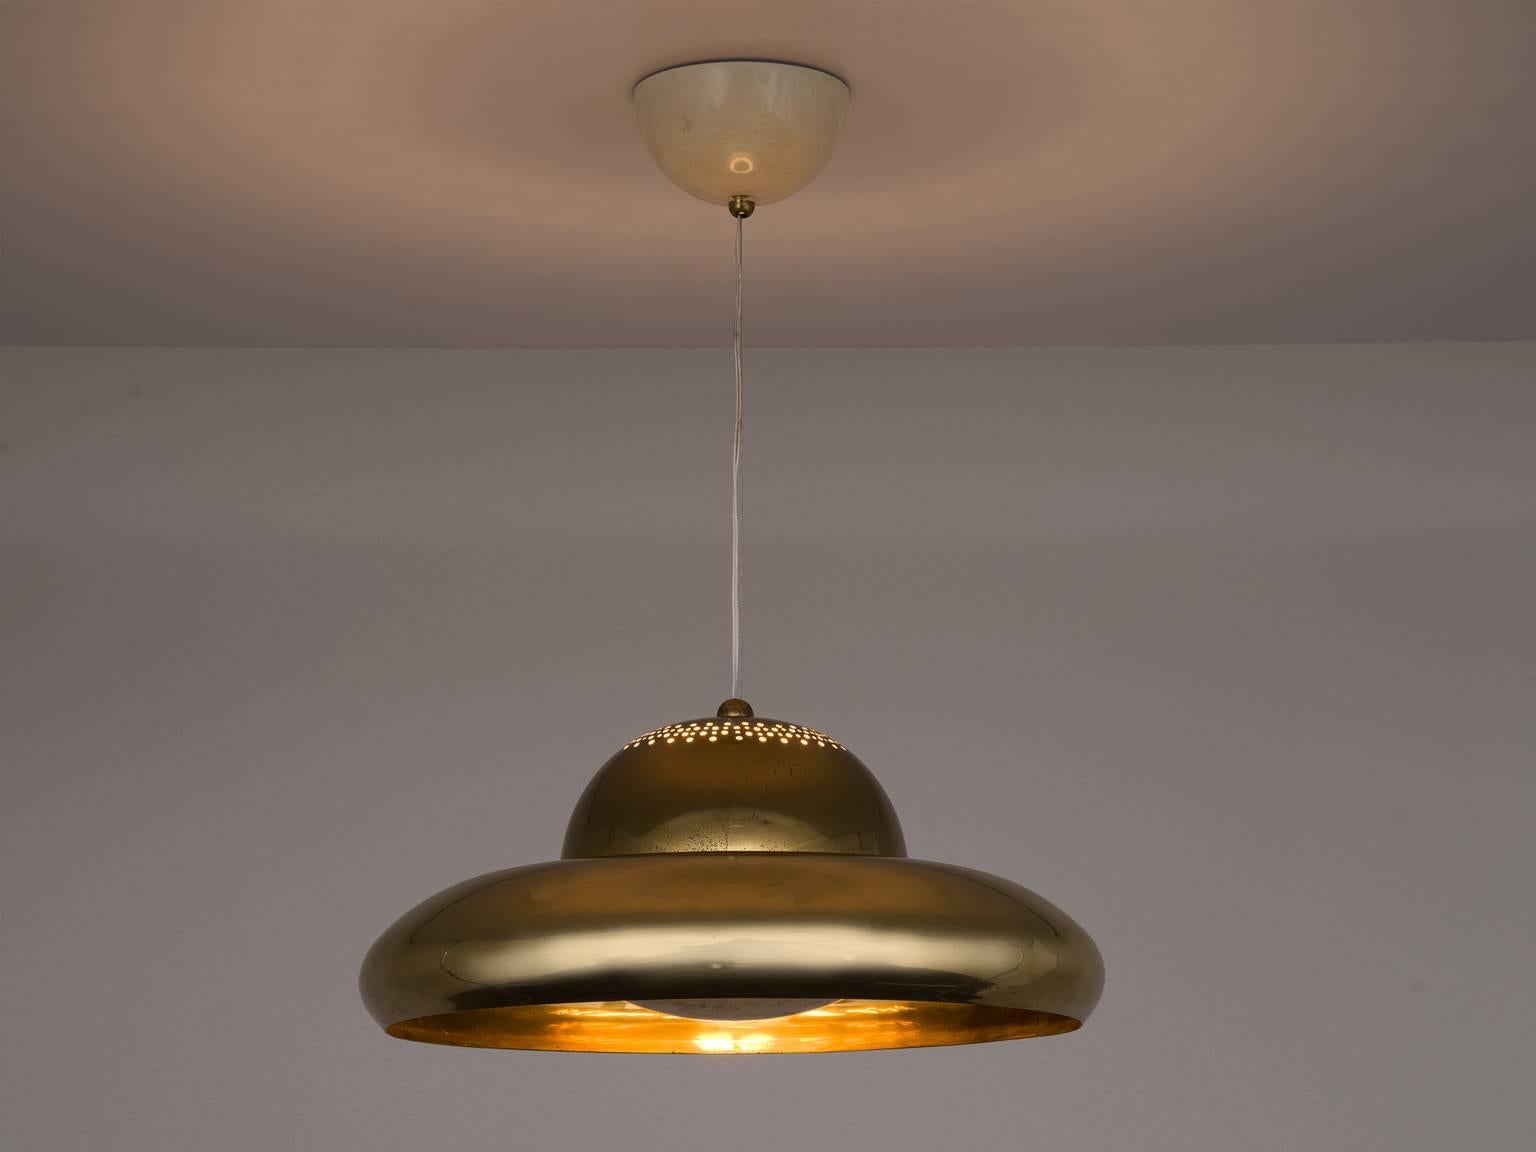 Afra and Tobia Scarpa for B&B Italia, Italy, pendants 'Fior di Loto’ model, brass, manufactured by Flos, 1963.

This lamp combines the Classic lampshade with playful postwar Italian design. The lamp is lovingly named the 'fior di loto', meaning